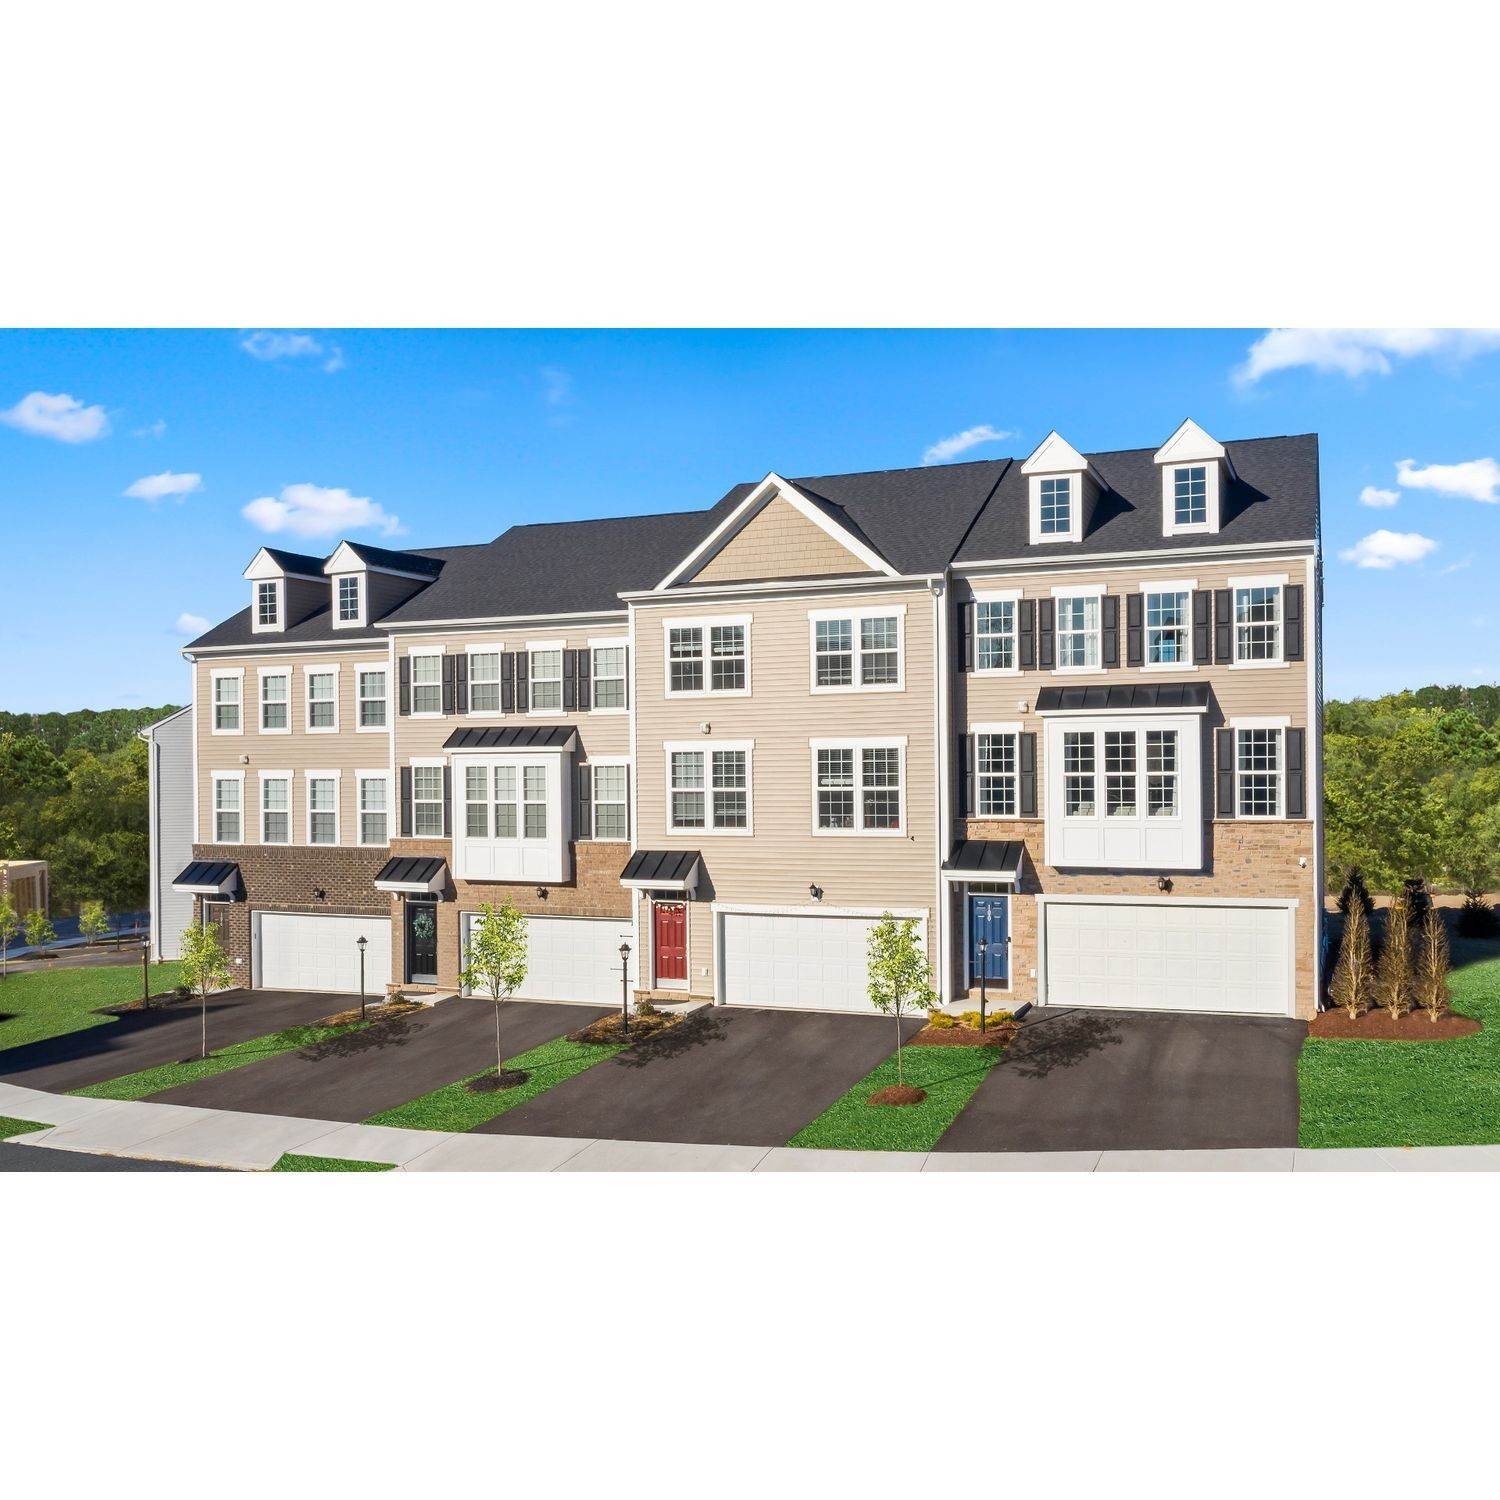 4. Rolling Hills建於 100 Sweetwater Drive, Coraopolis, PA 15108